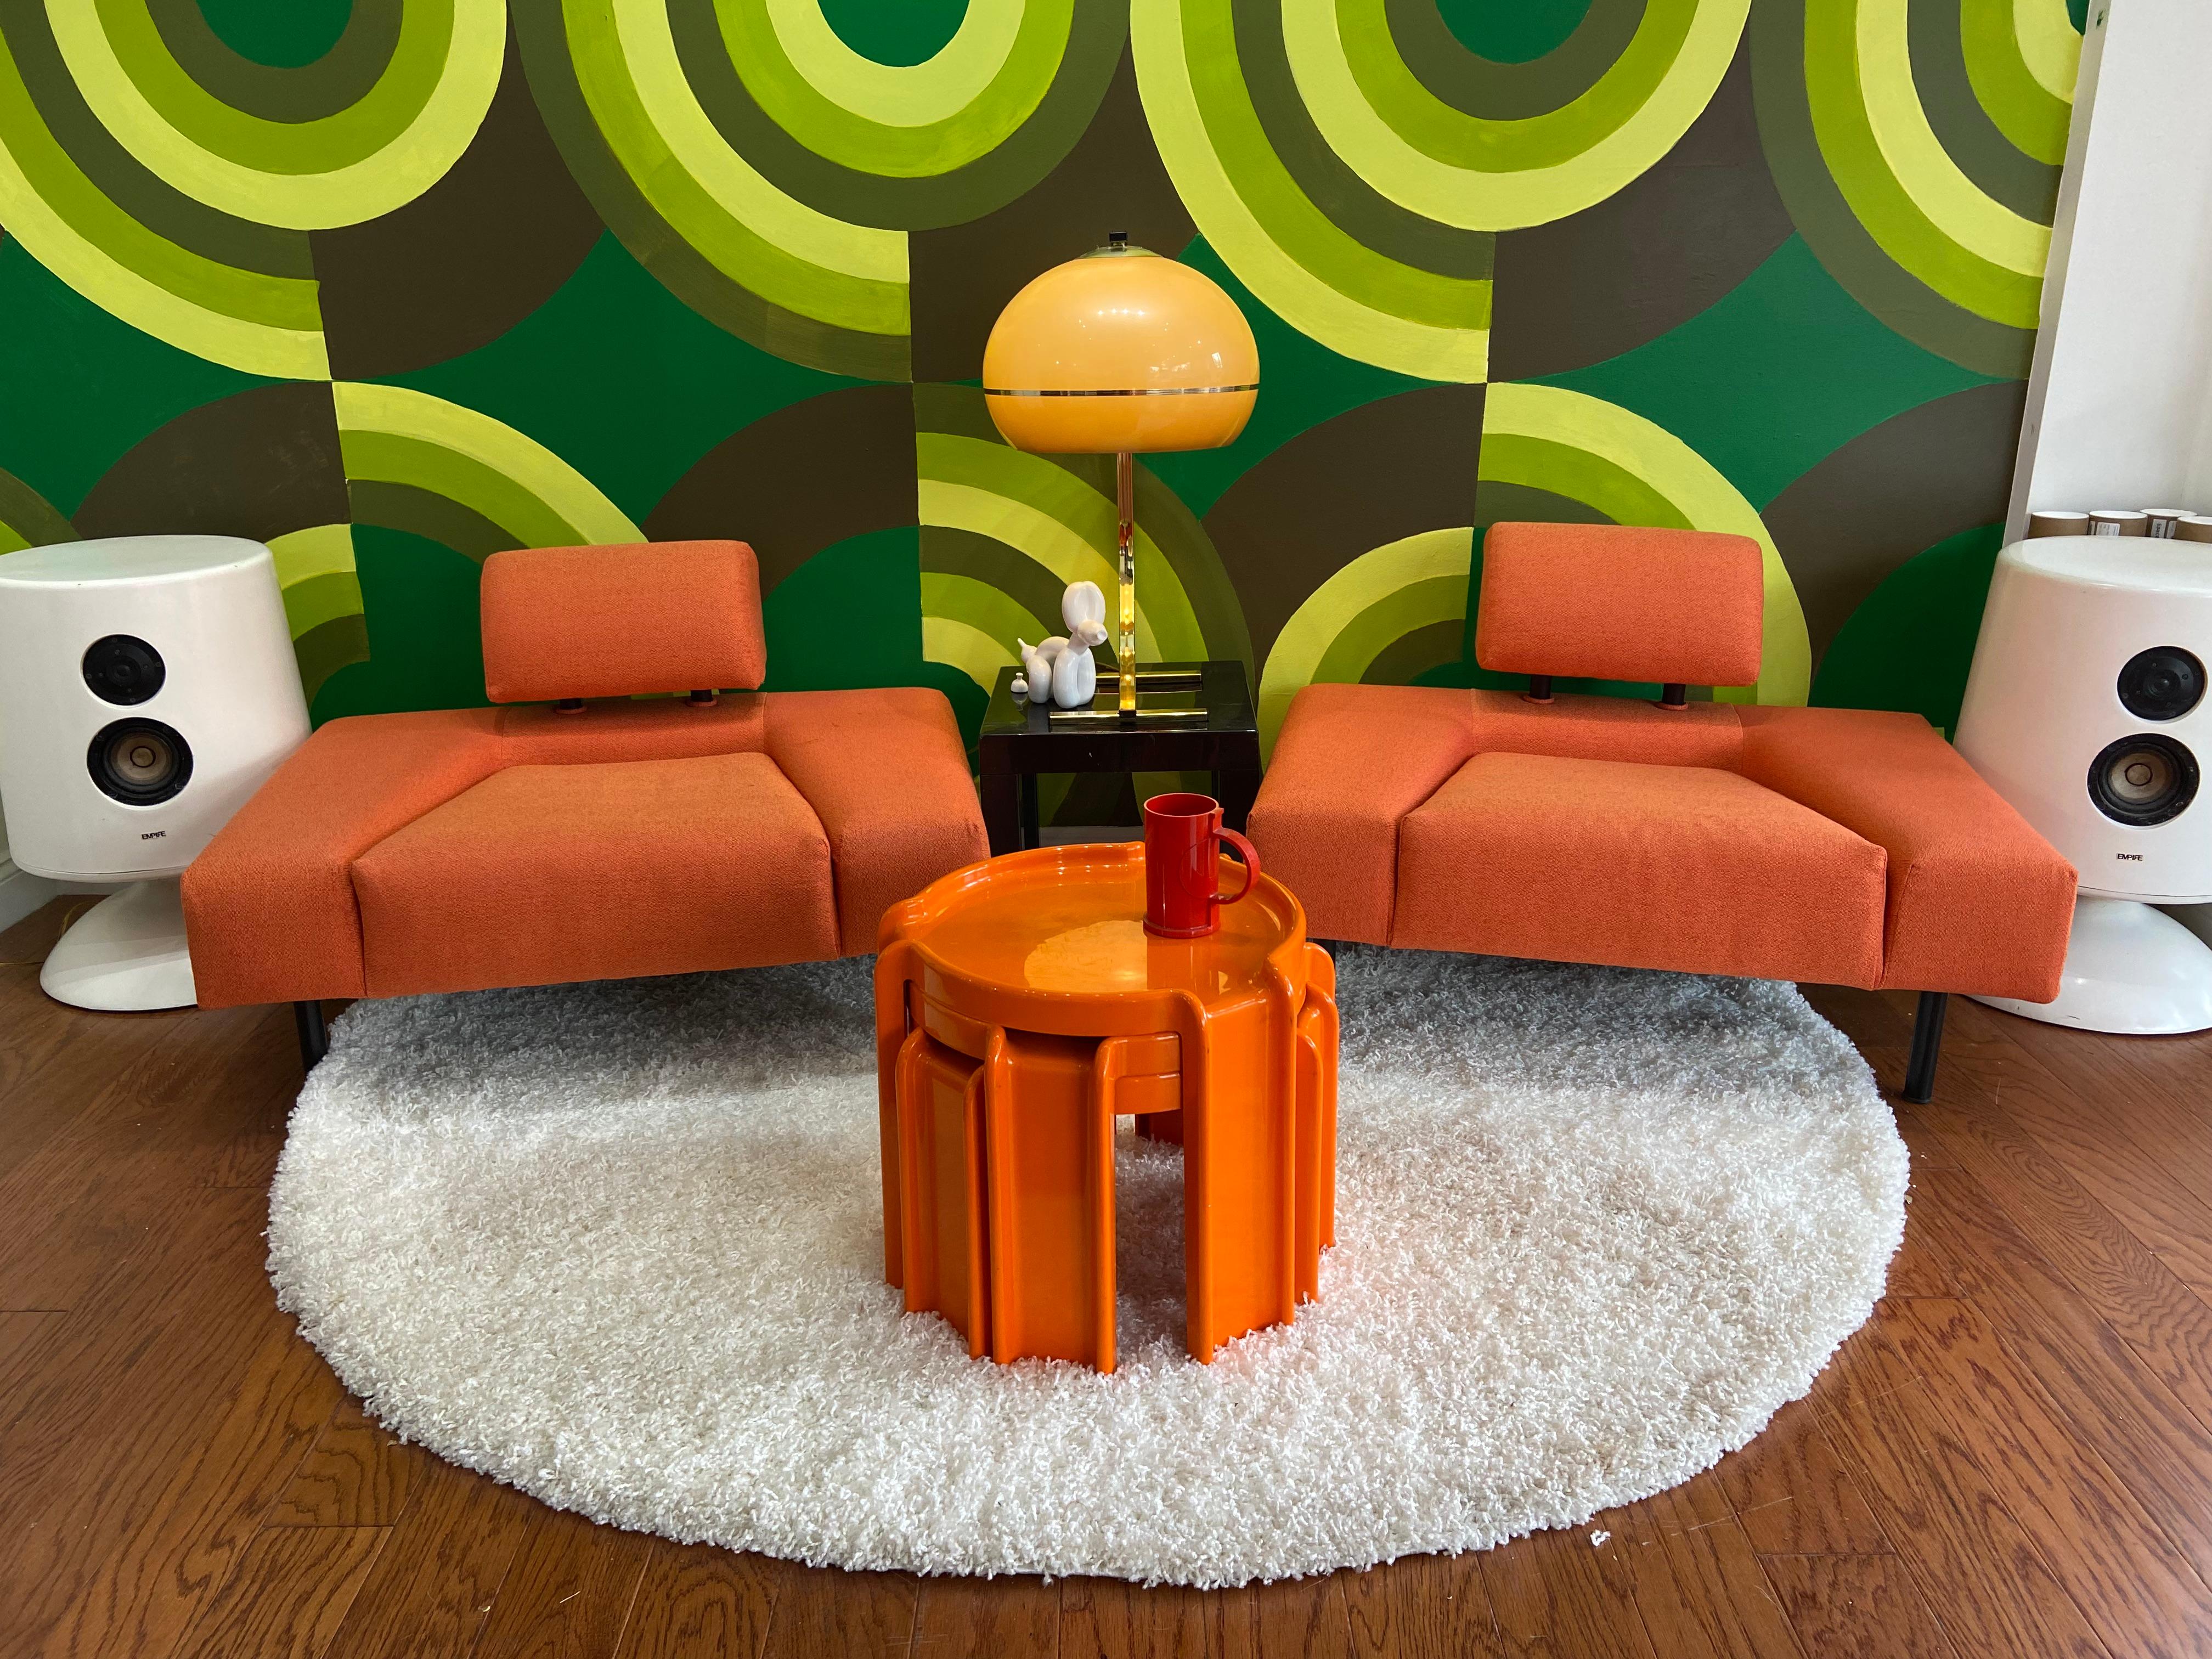 Chromium is featuring a pair of Rob Eckhardt, pouf ‘Garni’ lounge chairs imported from the Netherlands and freshly upholstered in orange fabric.  Despite there minimalist design, these amazingly comfortable chairs add a whimsical space age modern